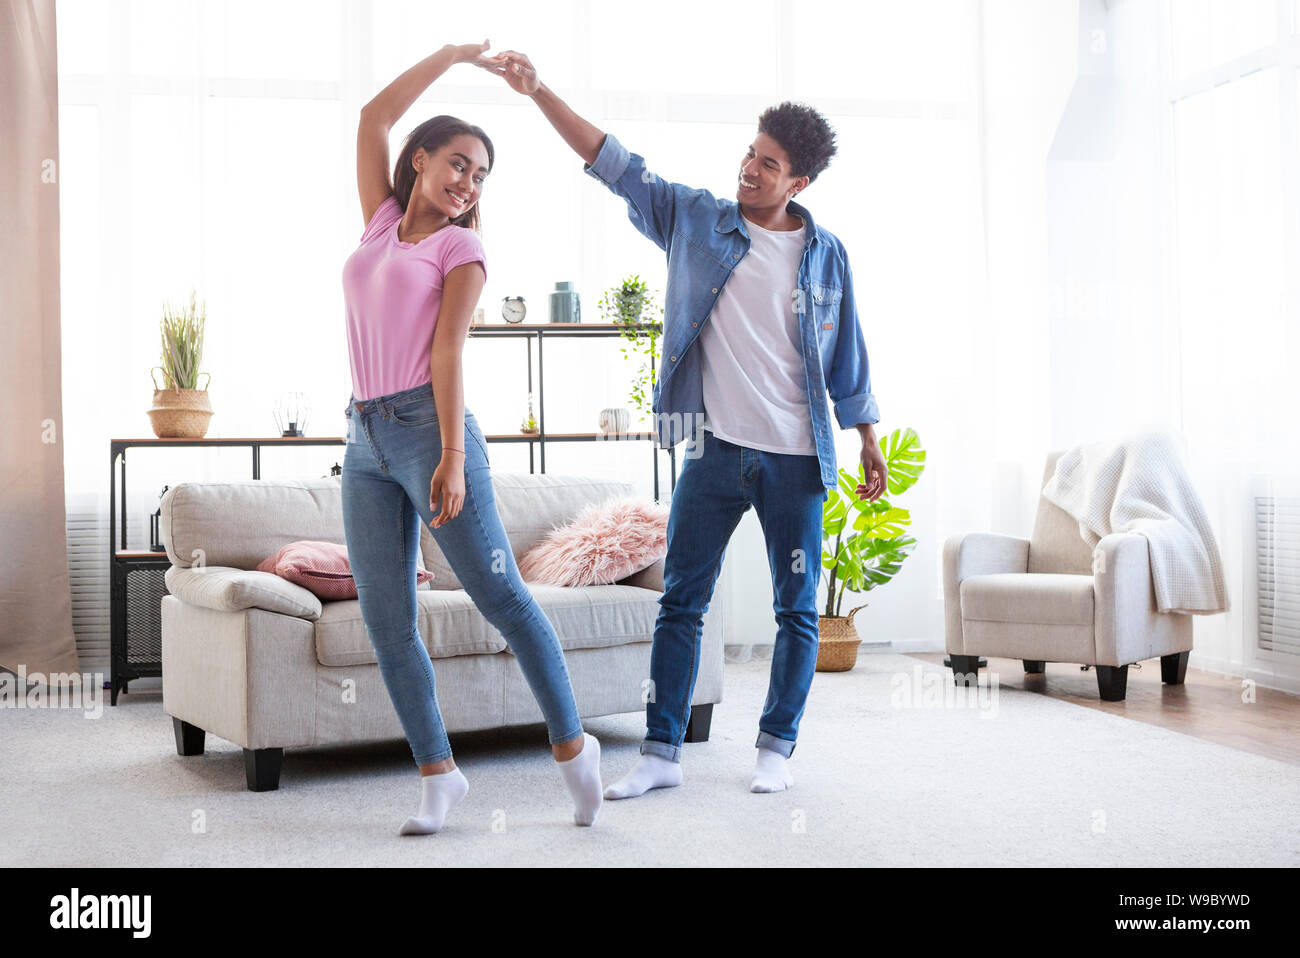 Romantic teen african american couple dancing at home Stock Photo